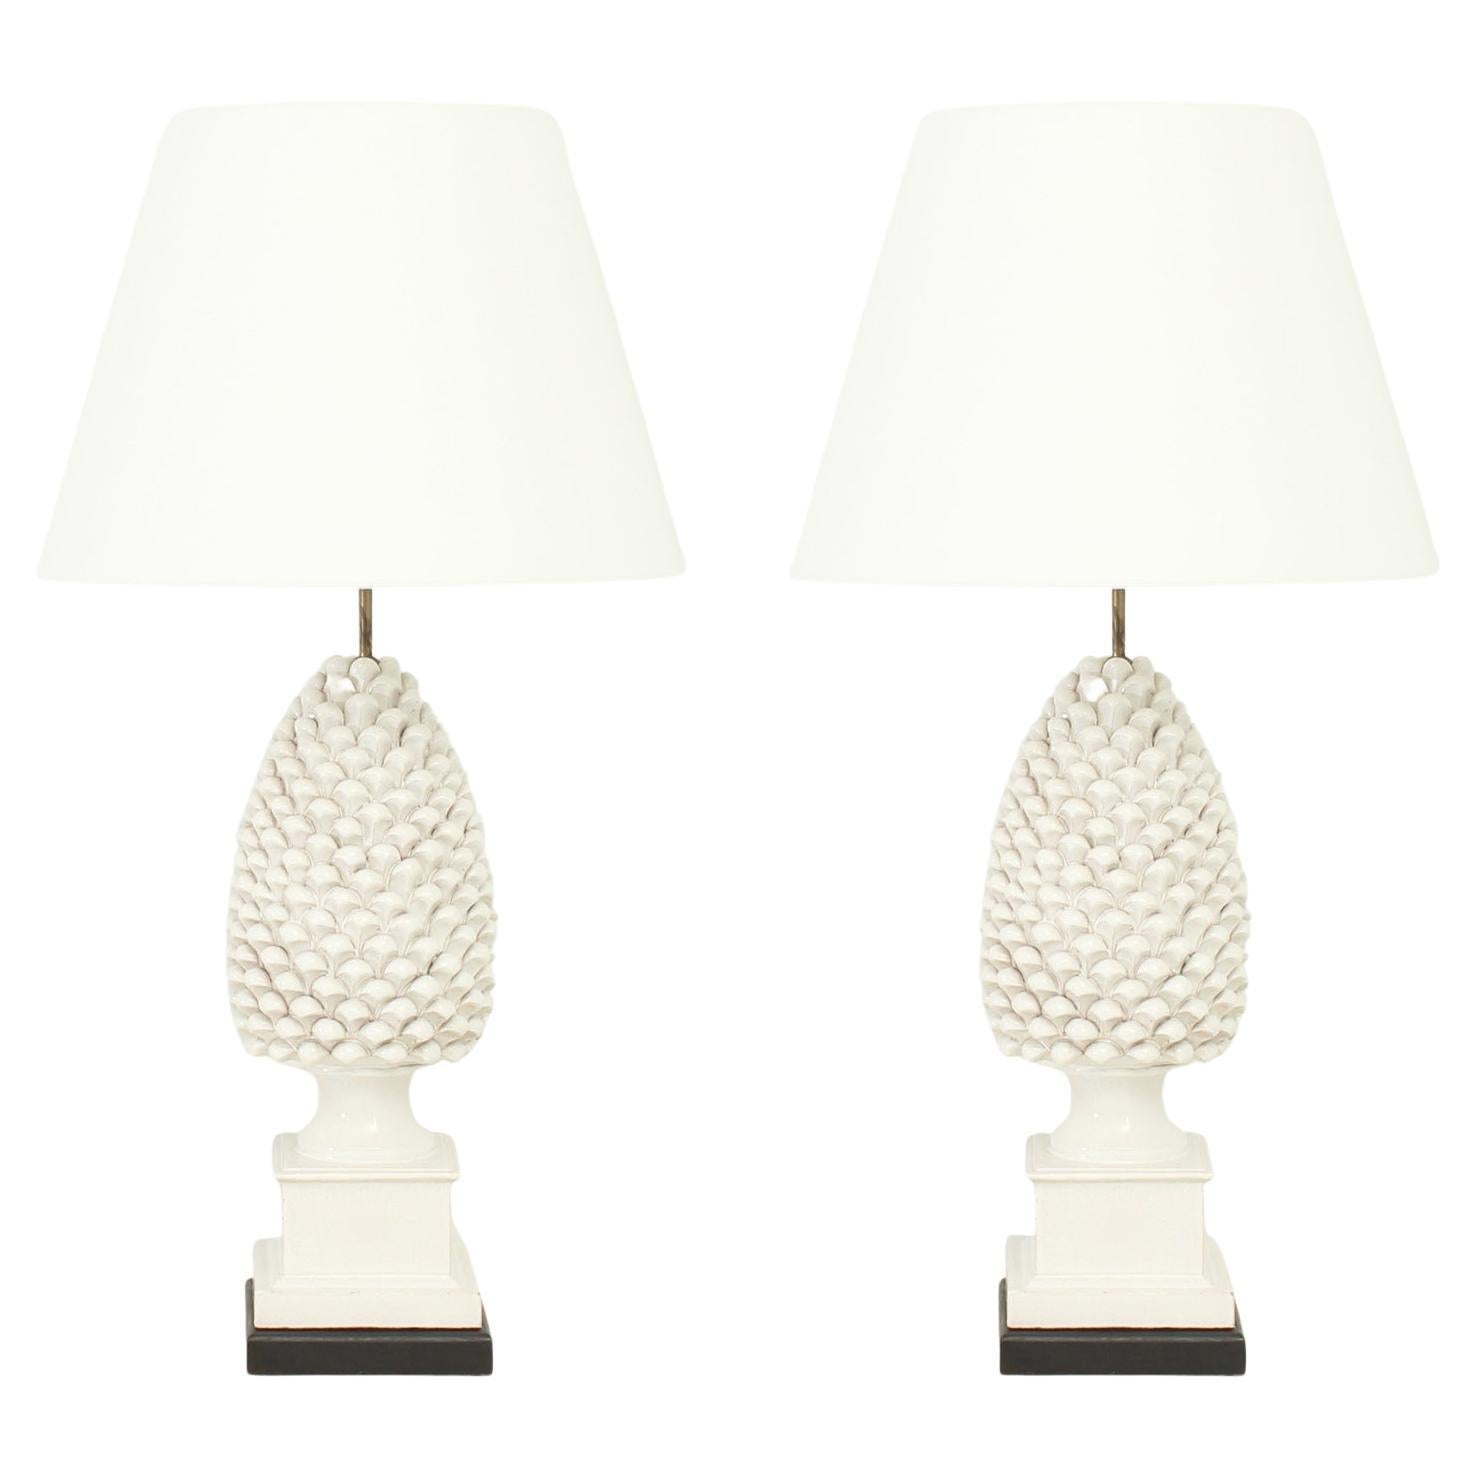 Pair of Pineapple Ceramic Table Lamps by Antonio Campuzano, Spain, 1960's For Sale